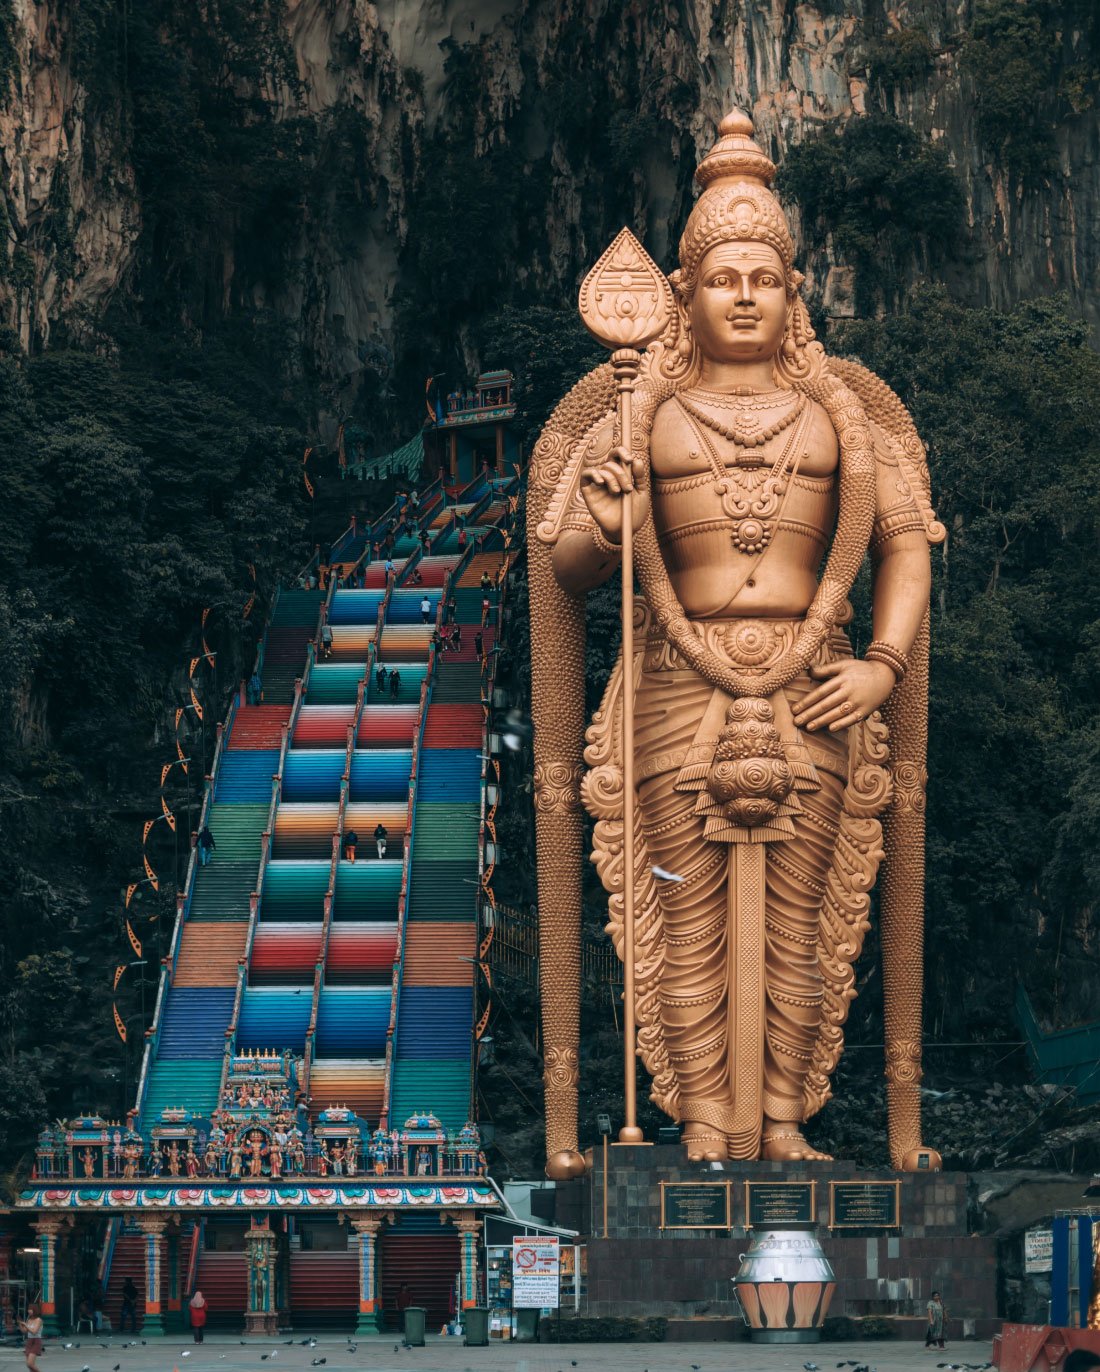 A towering golden statue of Lord Murugan stands majestically in front of a vibrant, multi-colored staircase leading to the Batu Caves. The statue is intricately detailed, and the lush, rocky backdrop of the caves adds to the grandeur of the scene.